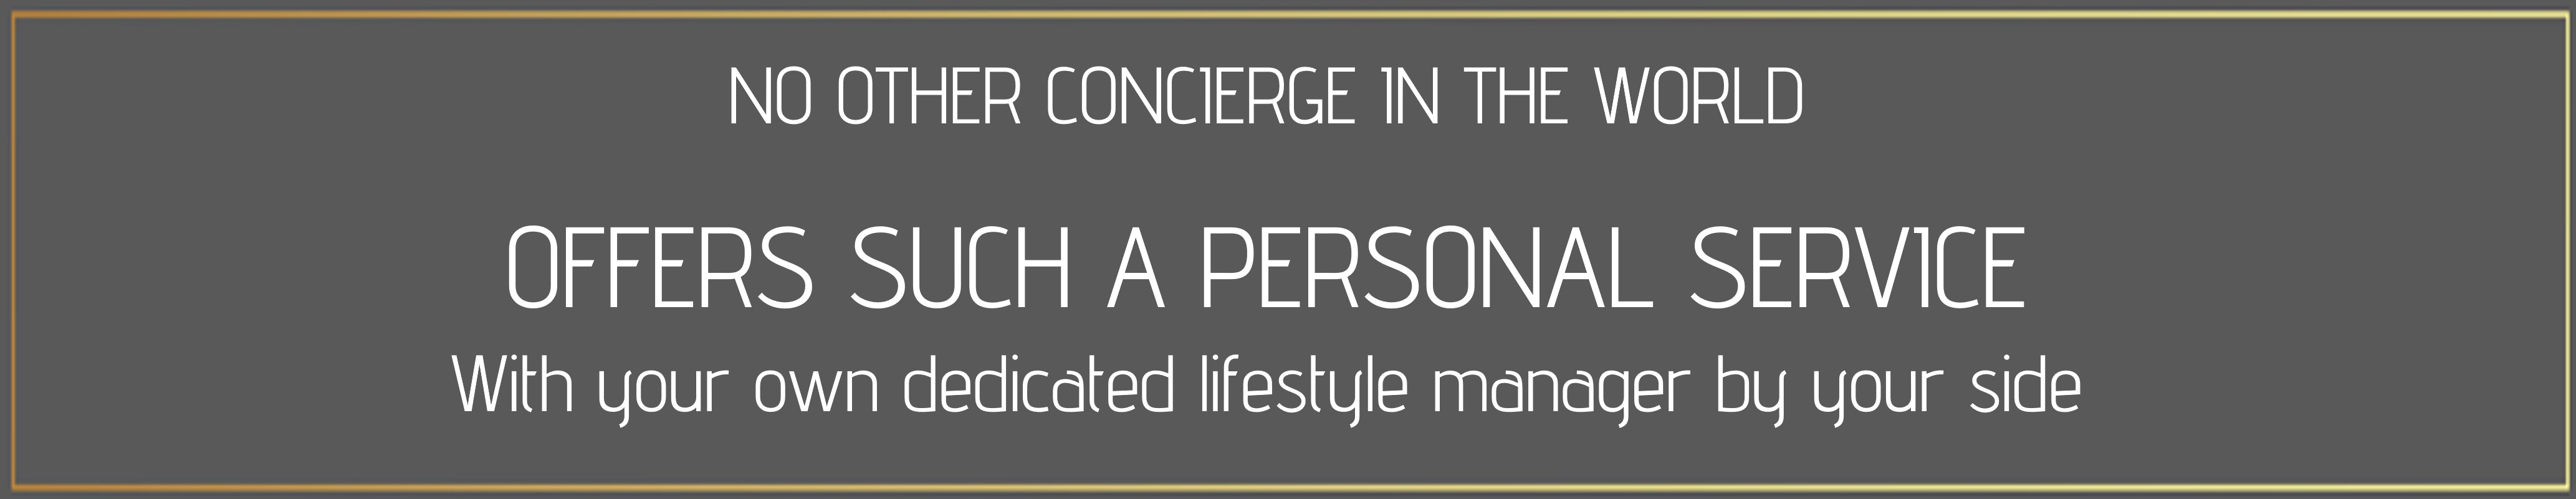 sincura offer the most personal one to one concierge service